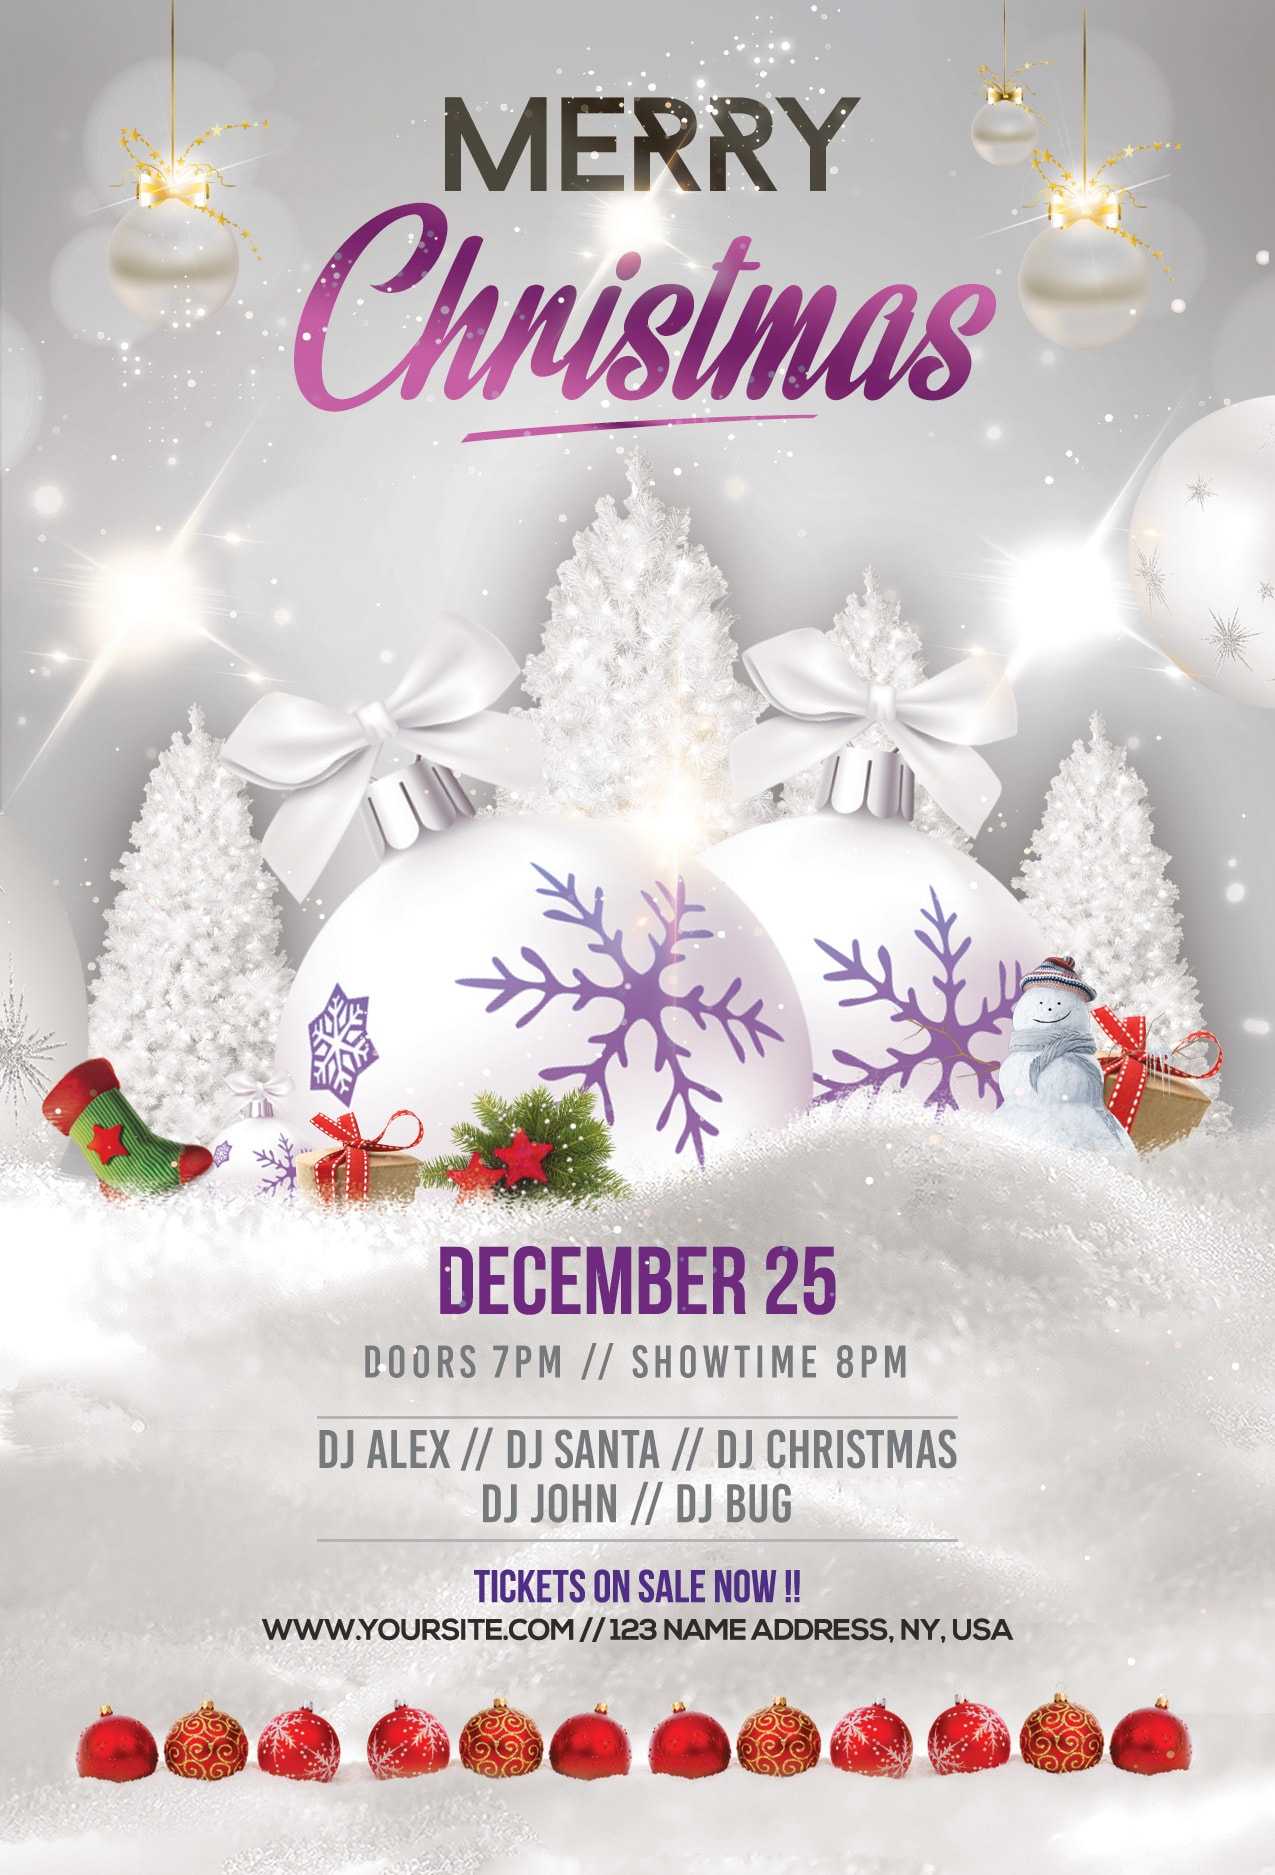 Merry Christmas & Holiday Free Psd Flyer Template – Stockpsd In Christmas Brochure Templates Free